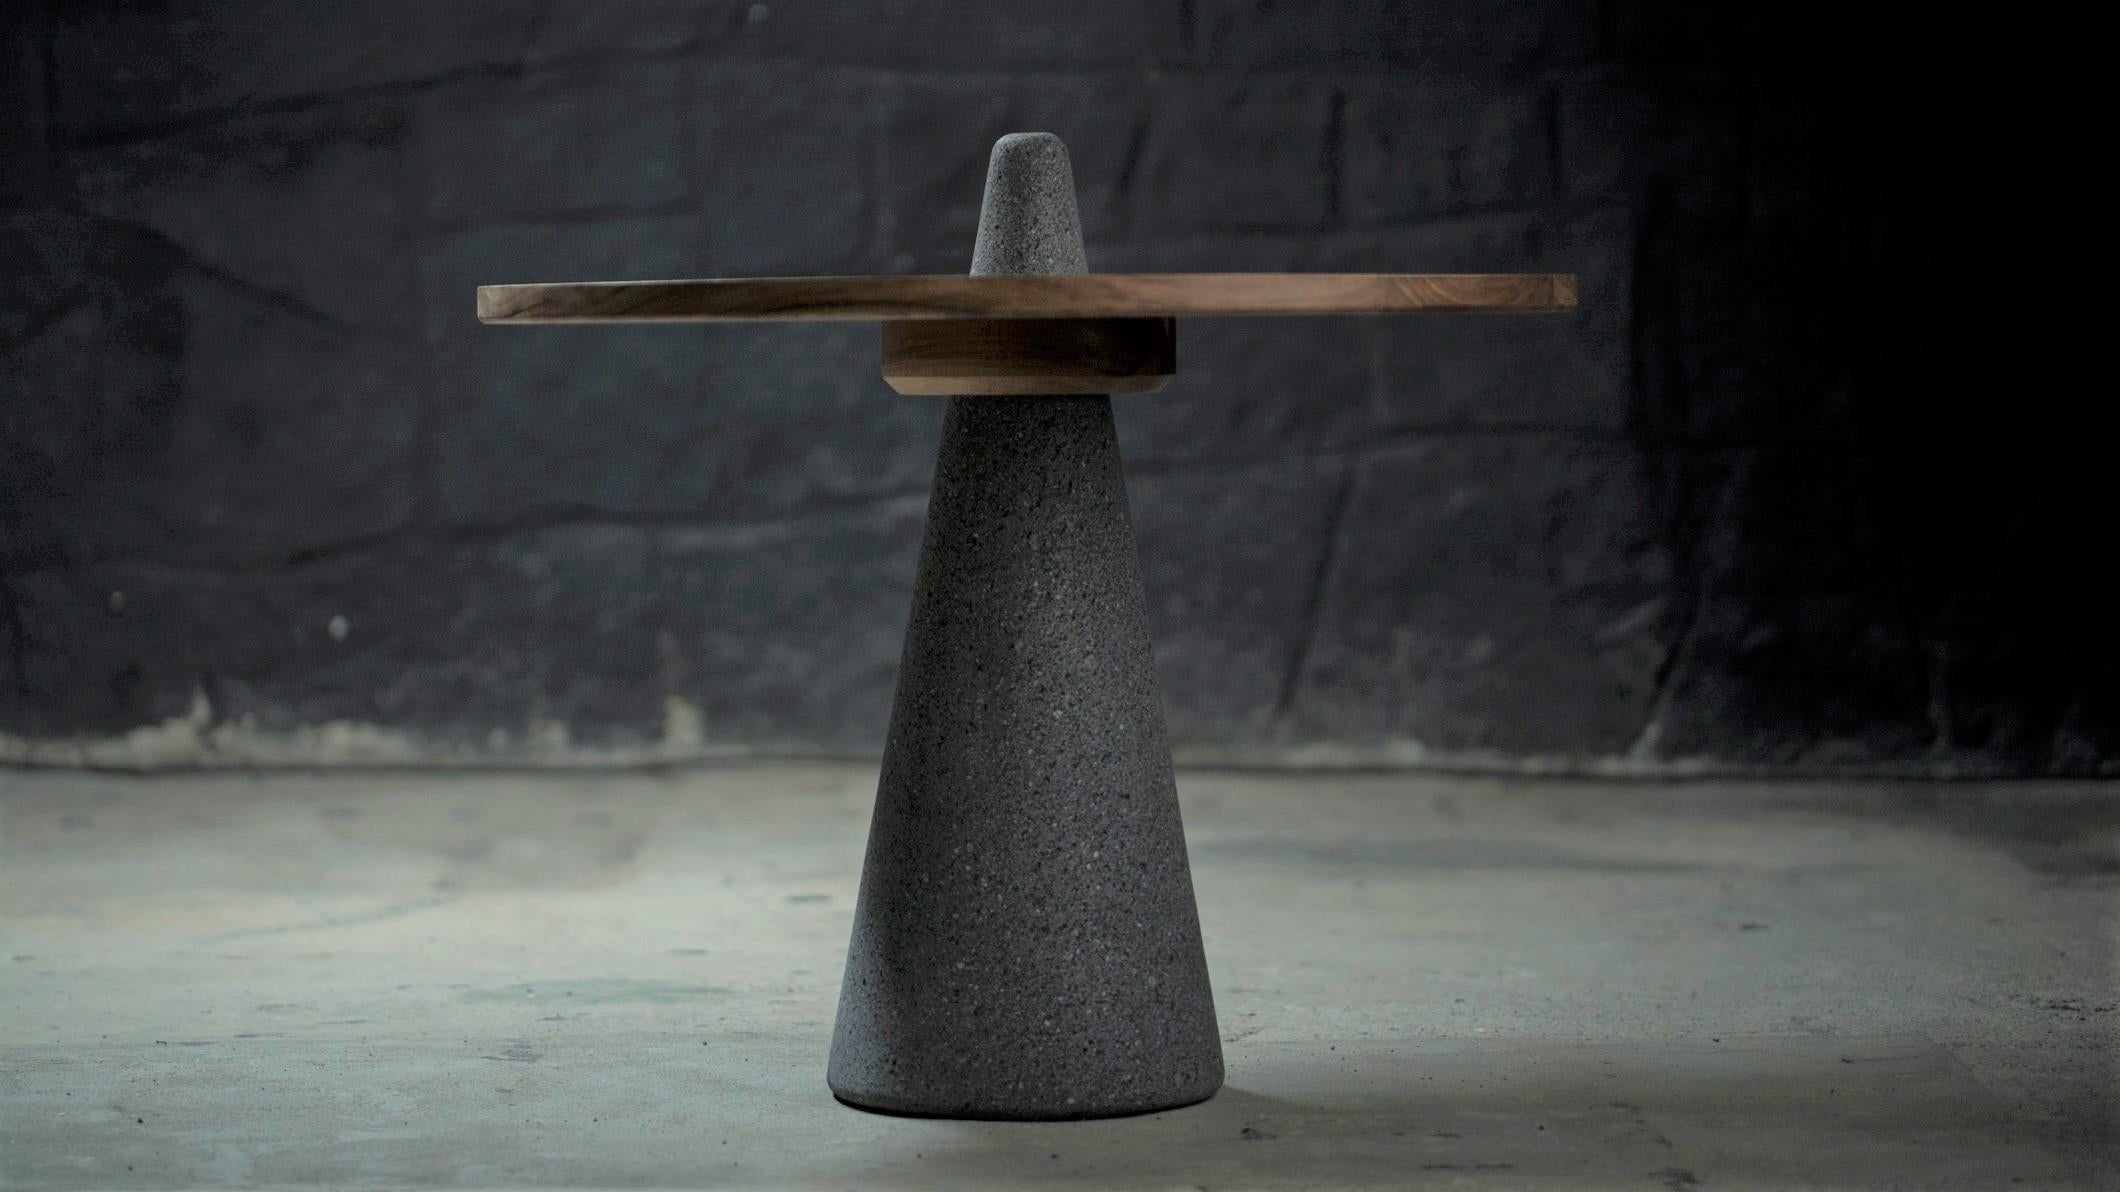 Teci table by Onora
Dimensions: D 60 x 60 cm
Materials: Carved basalt and thalami wood.

The Teci table was born from the synthesis of the stone metlapil used in the metate to grind corn. A tzalam wood surface rests on a conical basalt